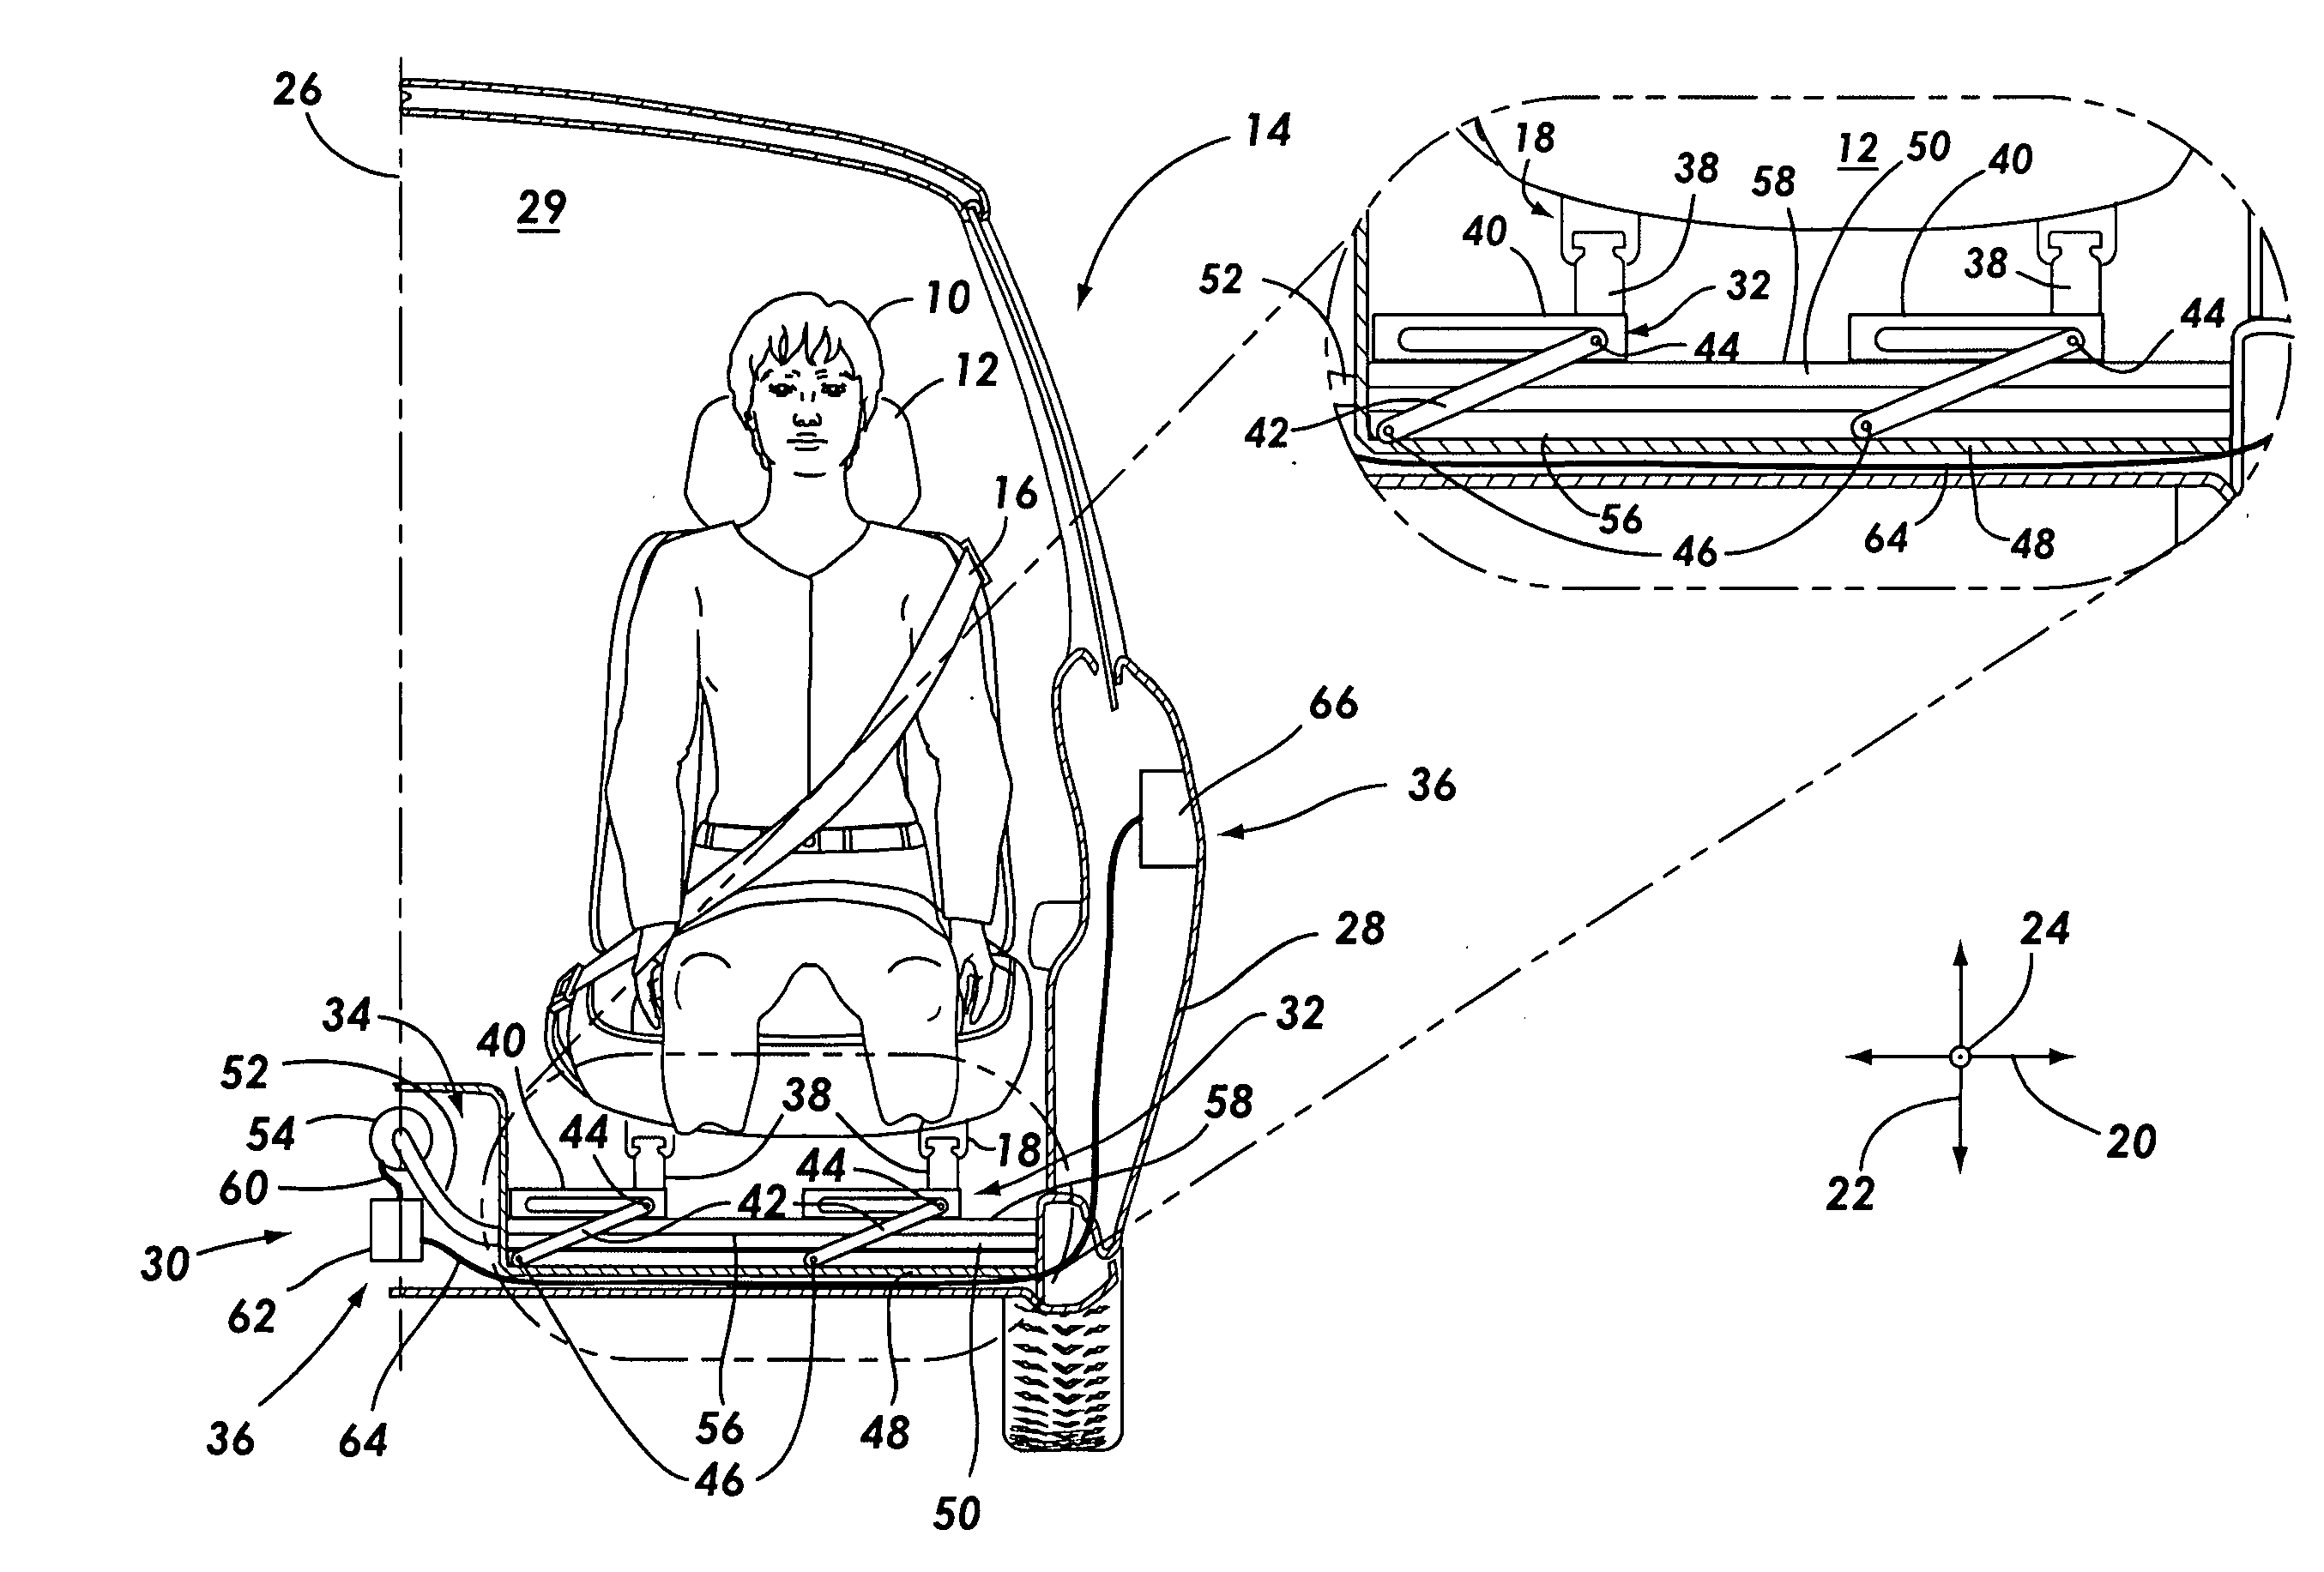 Seat mounting structure for mitigating injury in side impacts